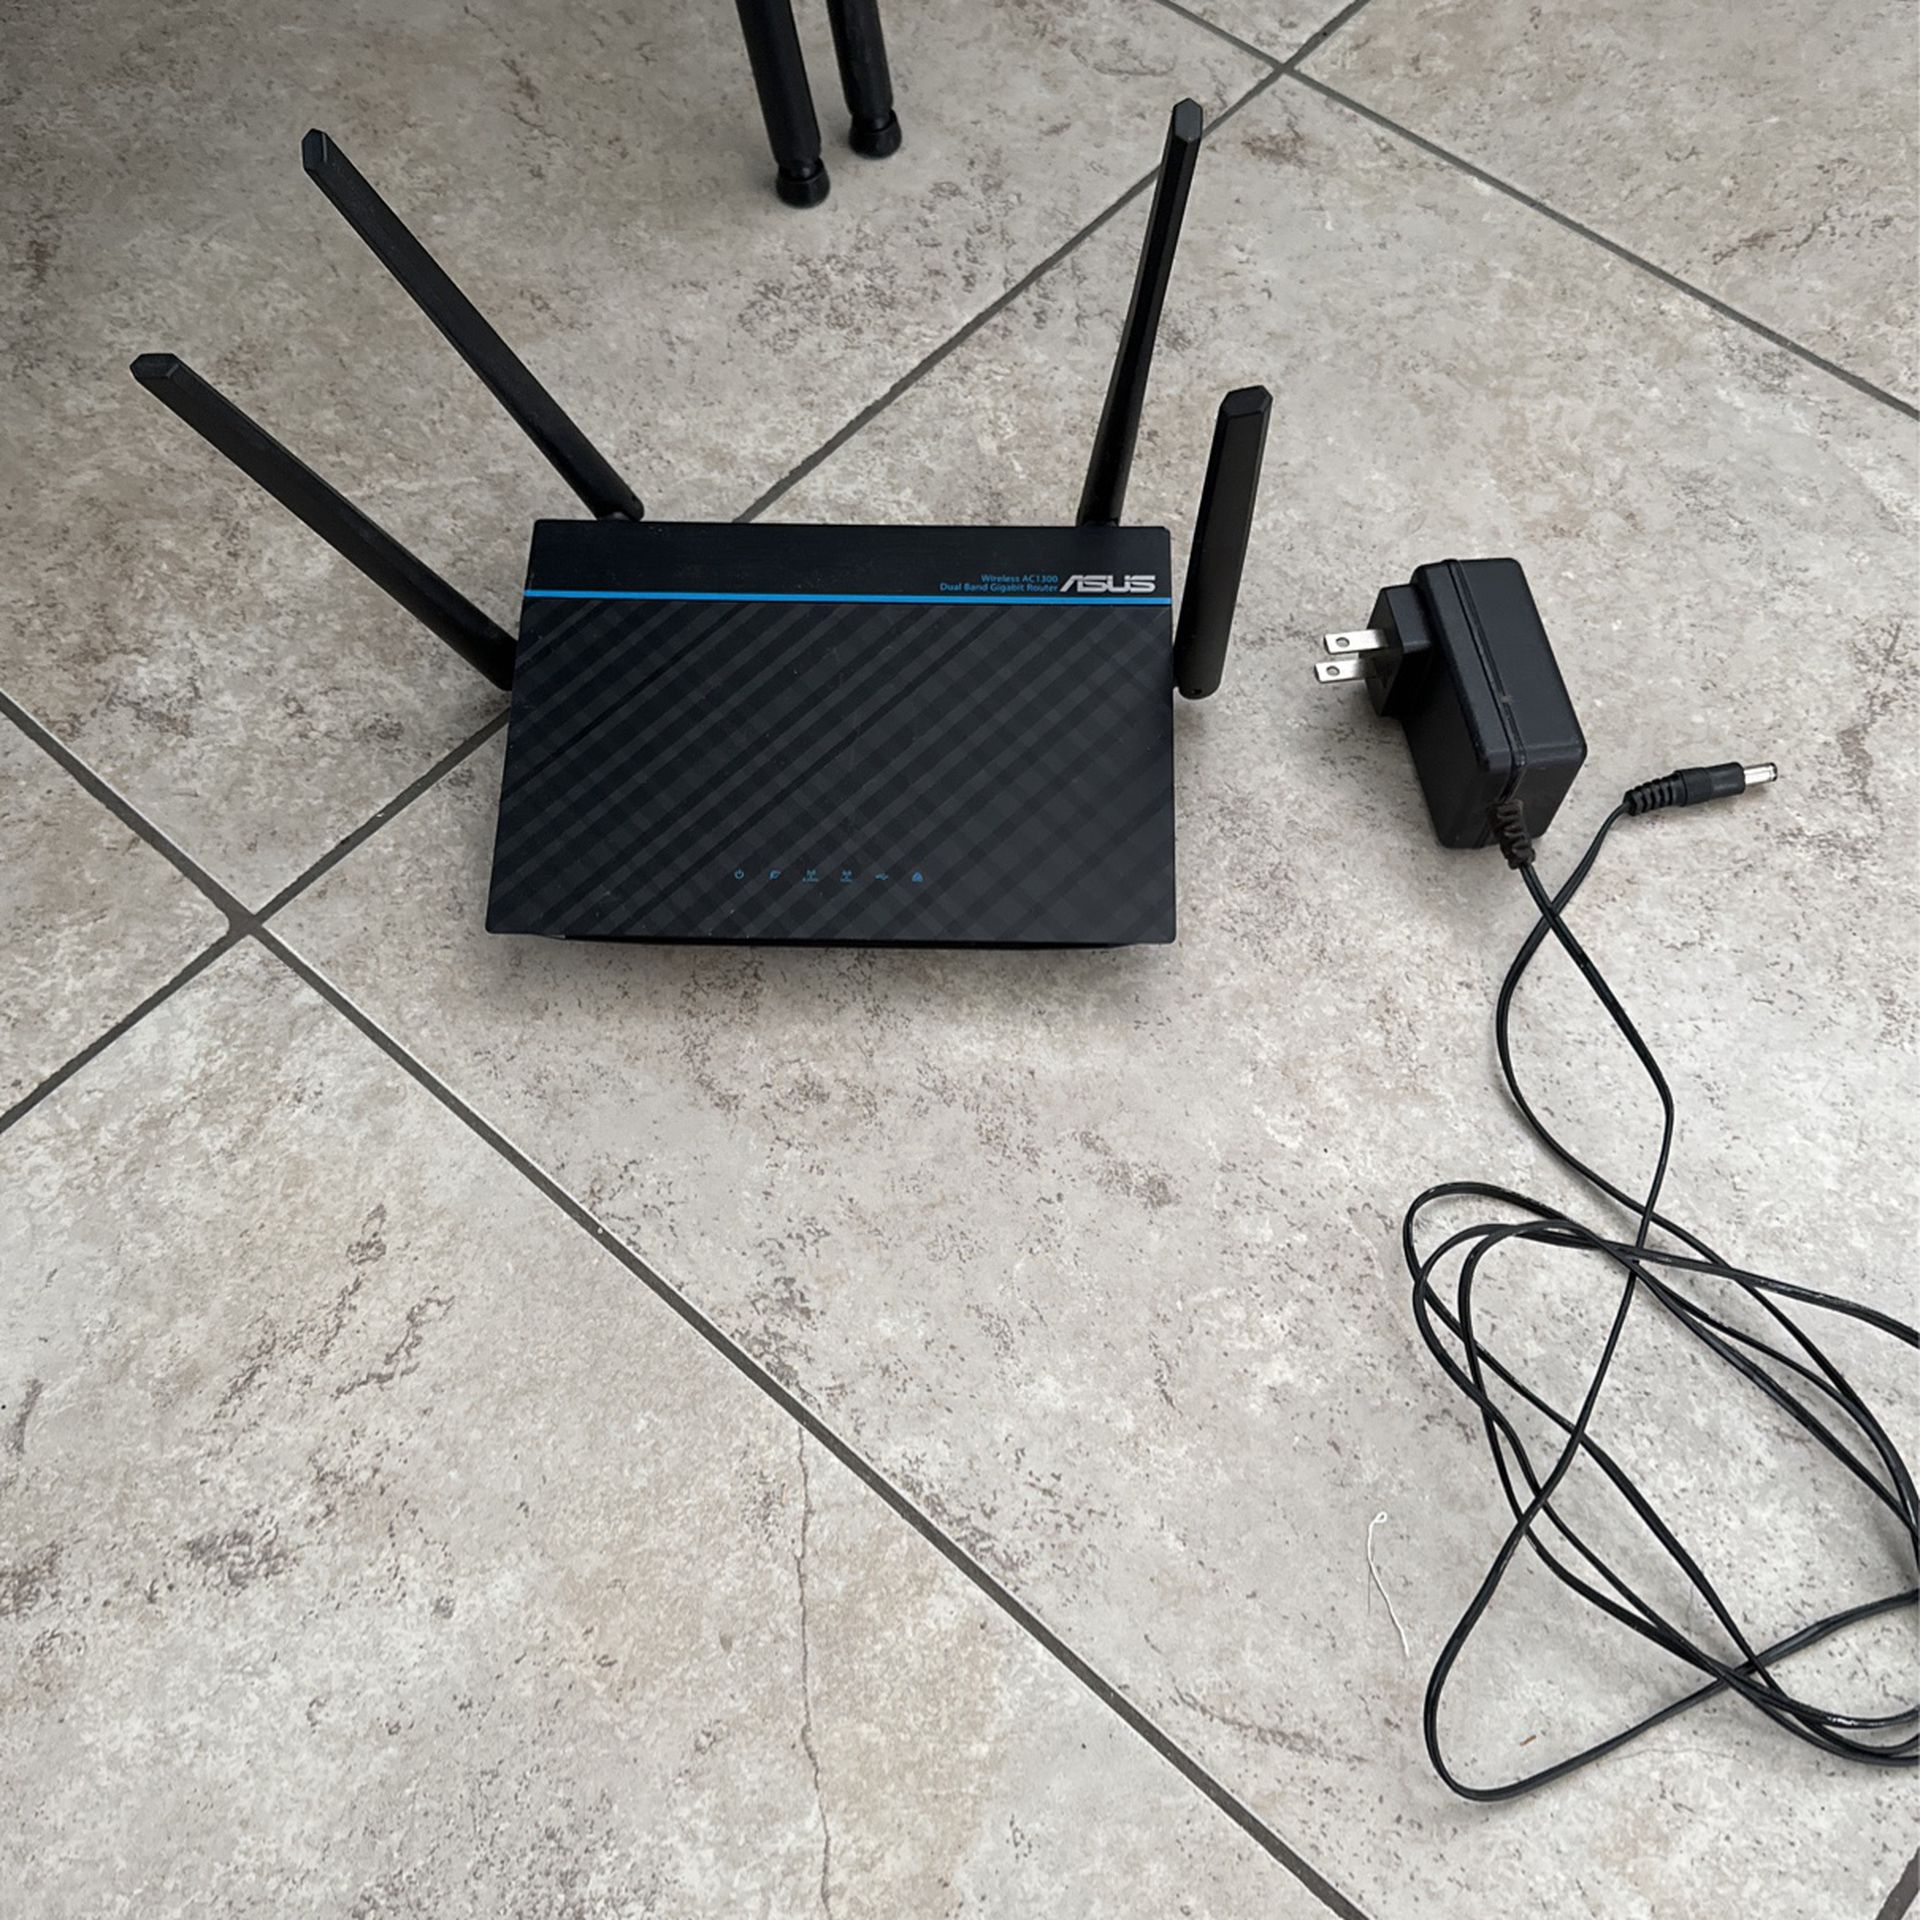 Asus Wireless AC1300 Router